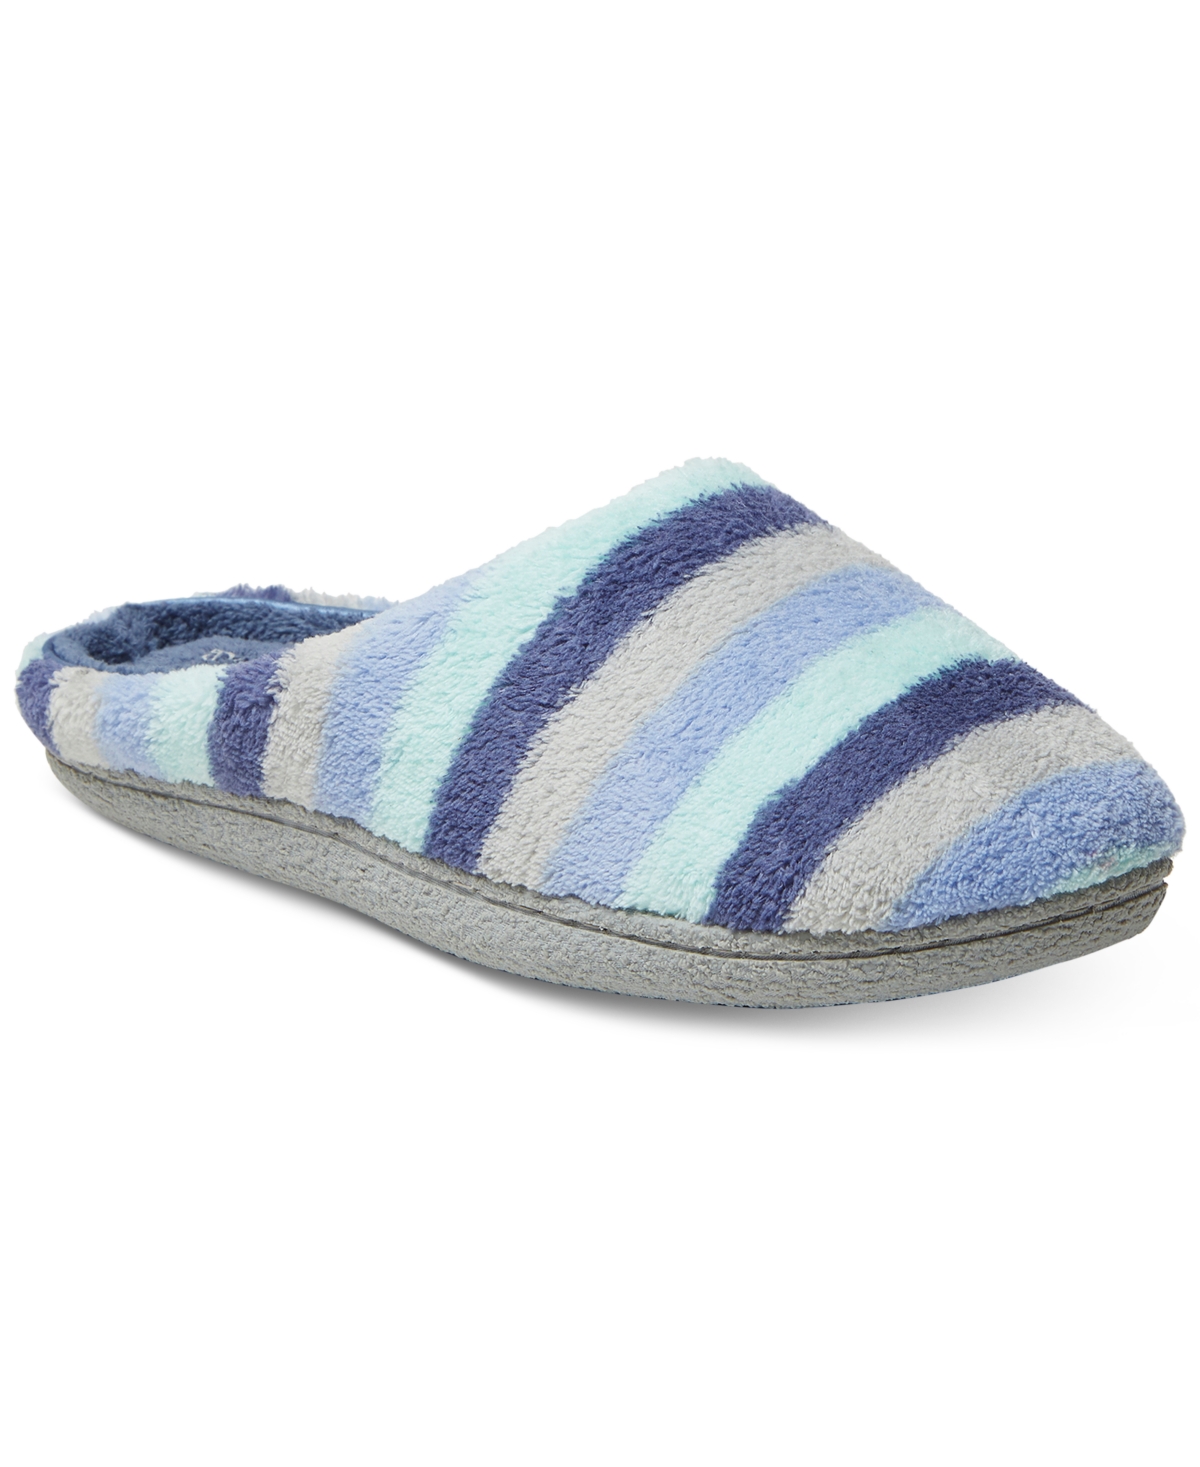 Leslie Quilted Microfiber Terry Clog Slipper, Online Only - Blue Multi